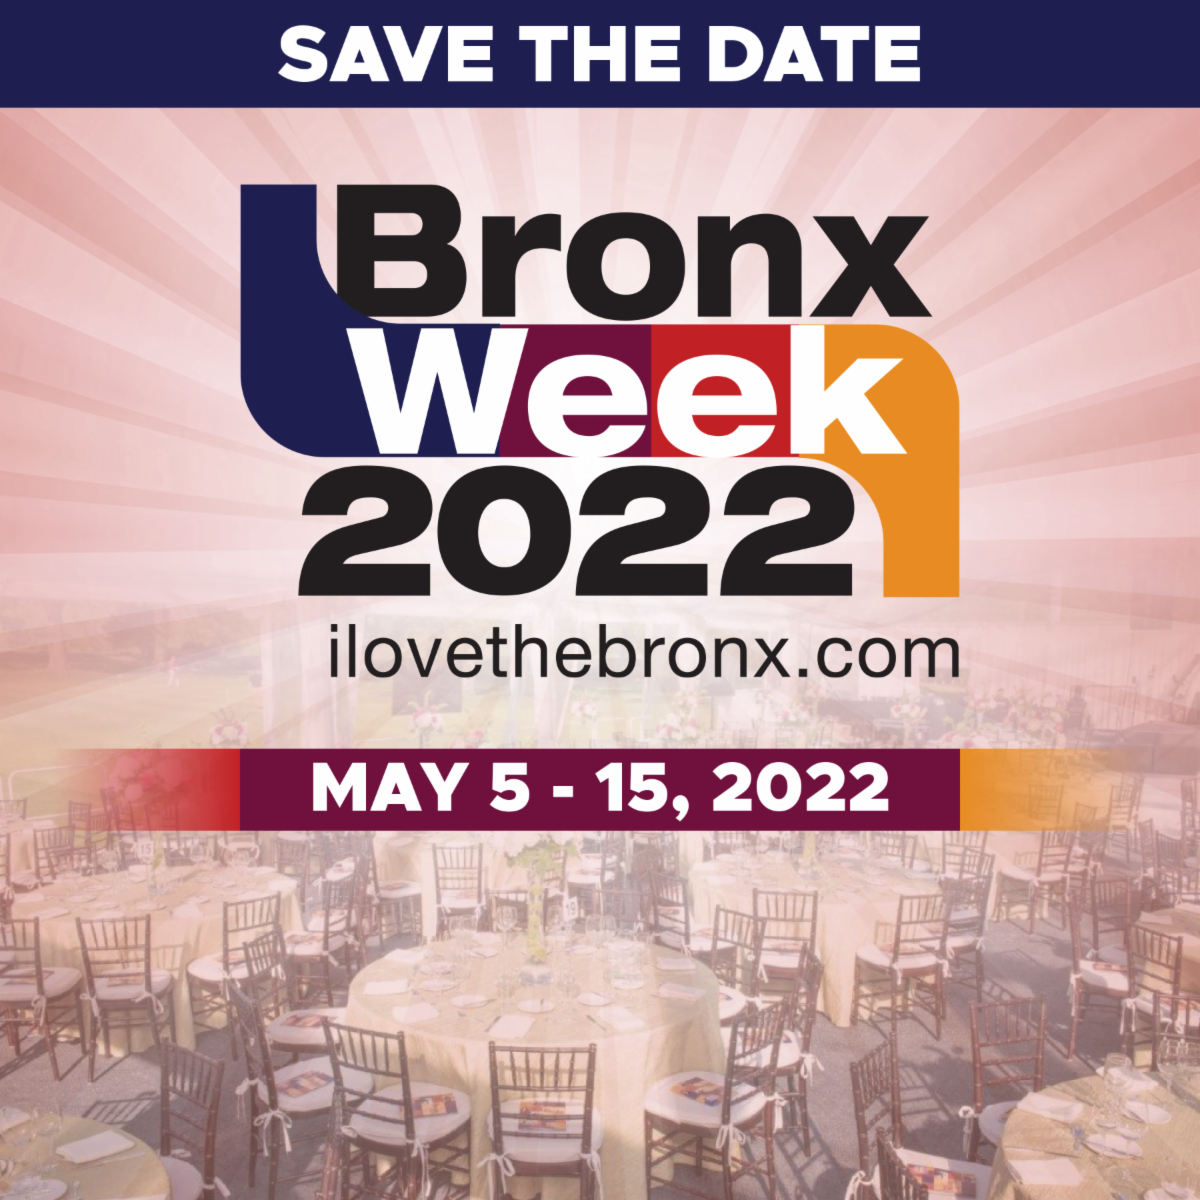 Bronx Week - Save the Date.png